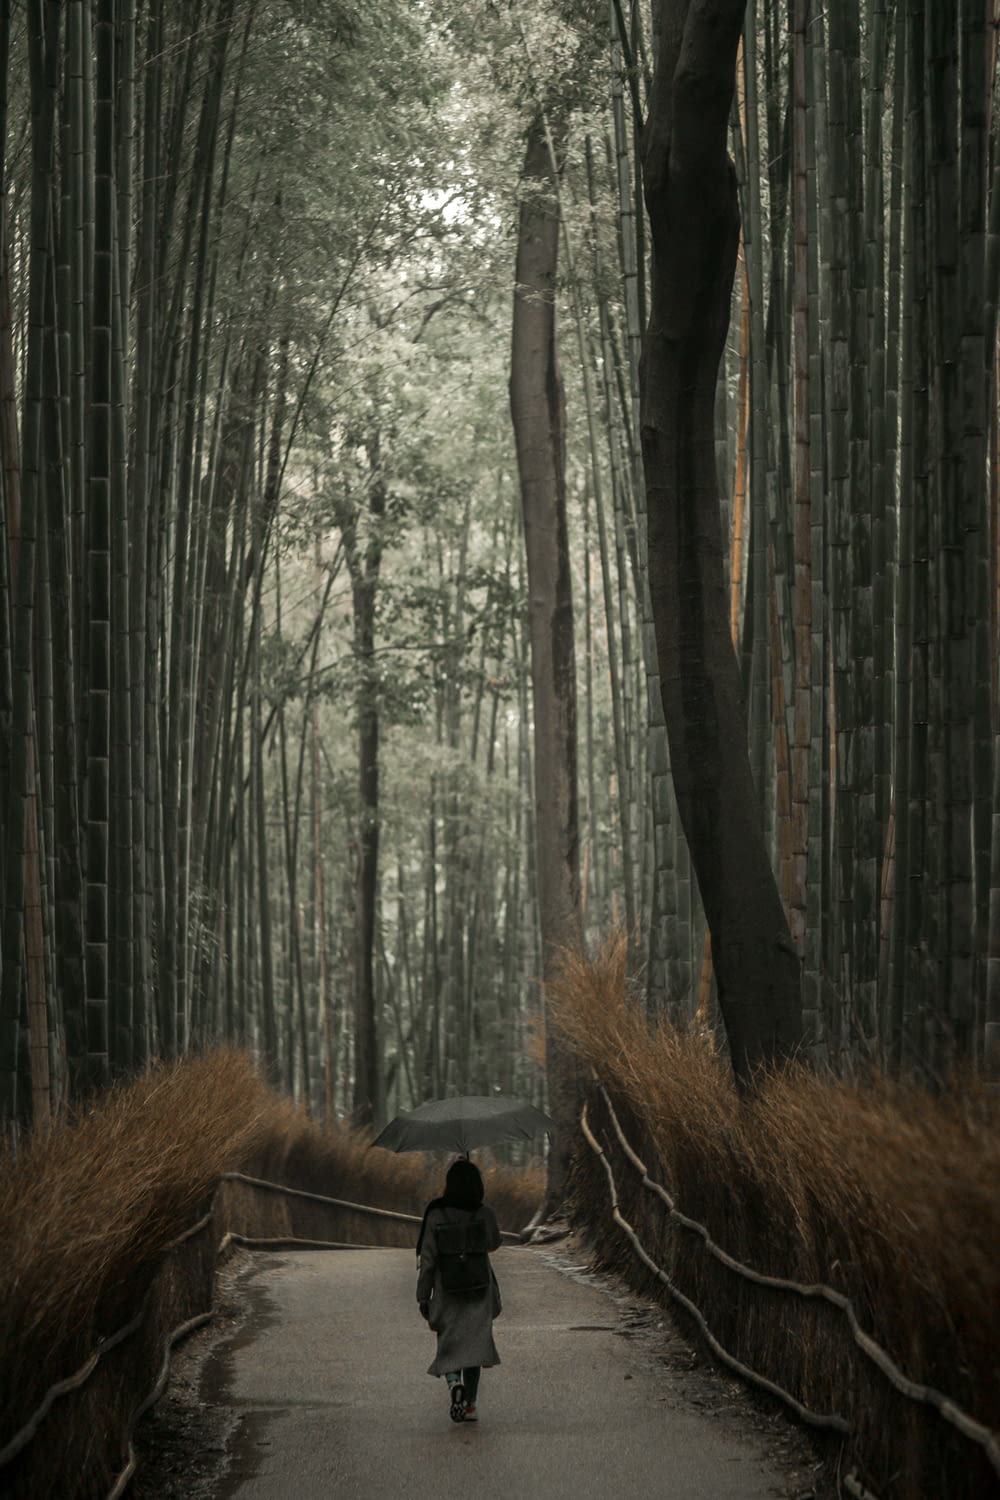 a person walking down a path in a bamboo forest